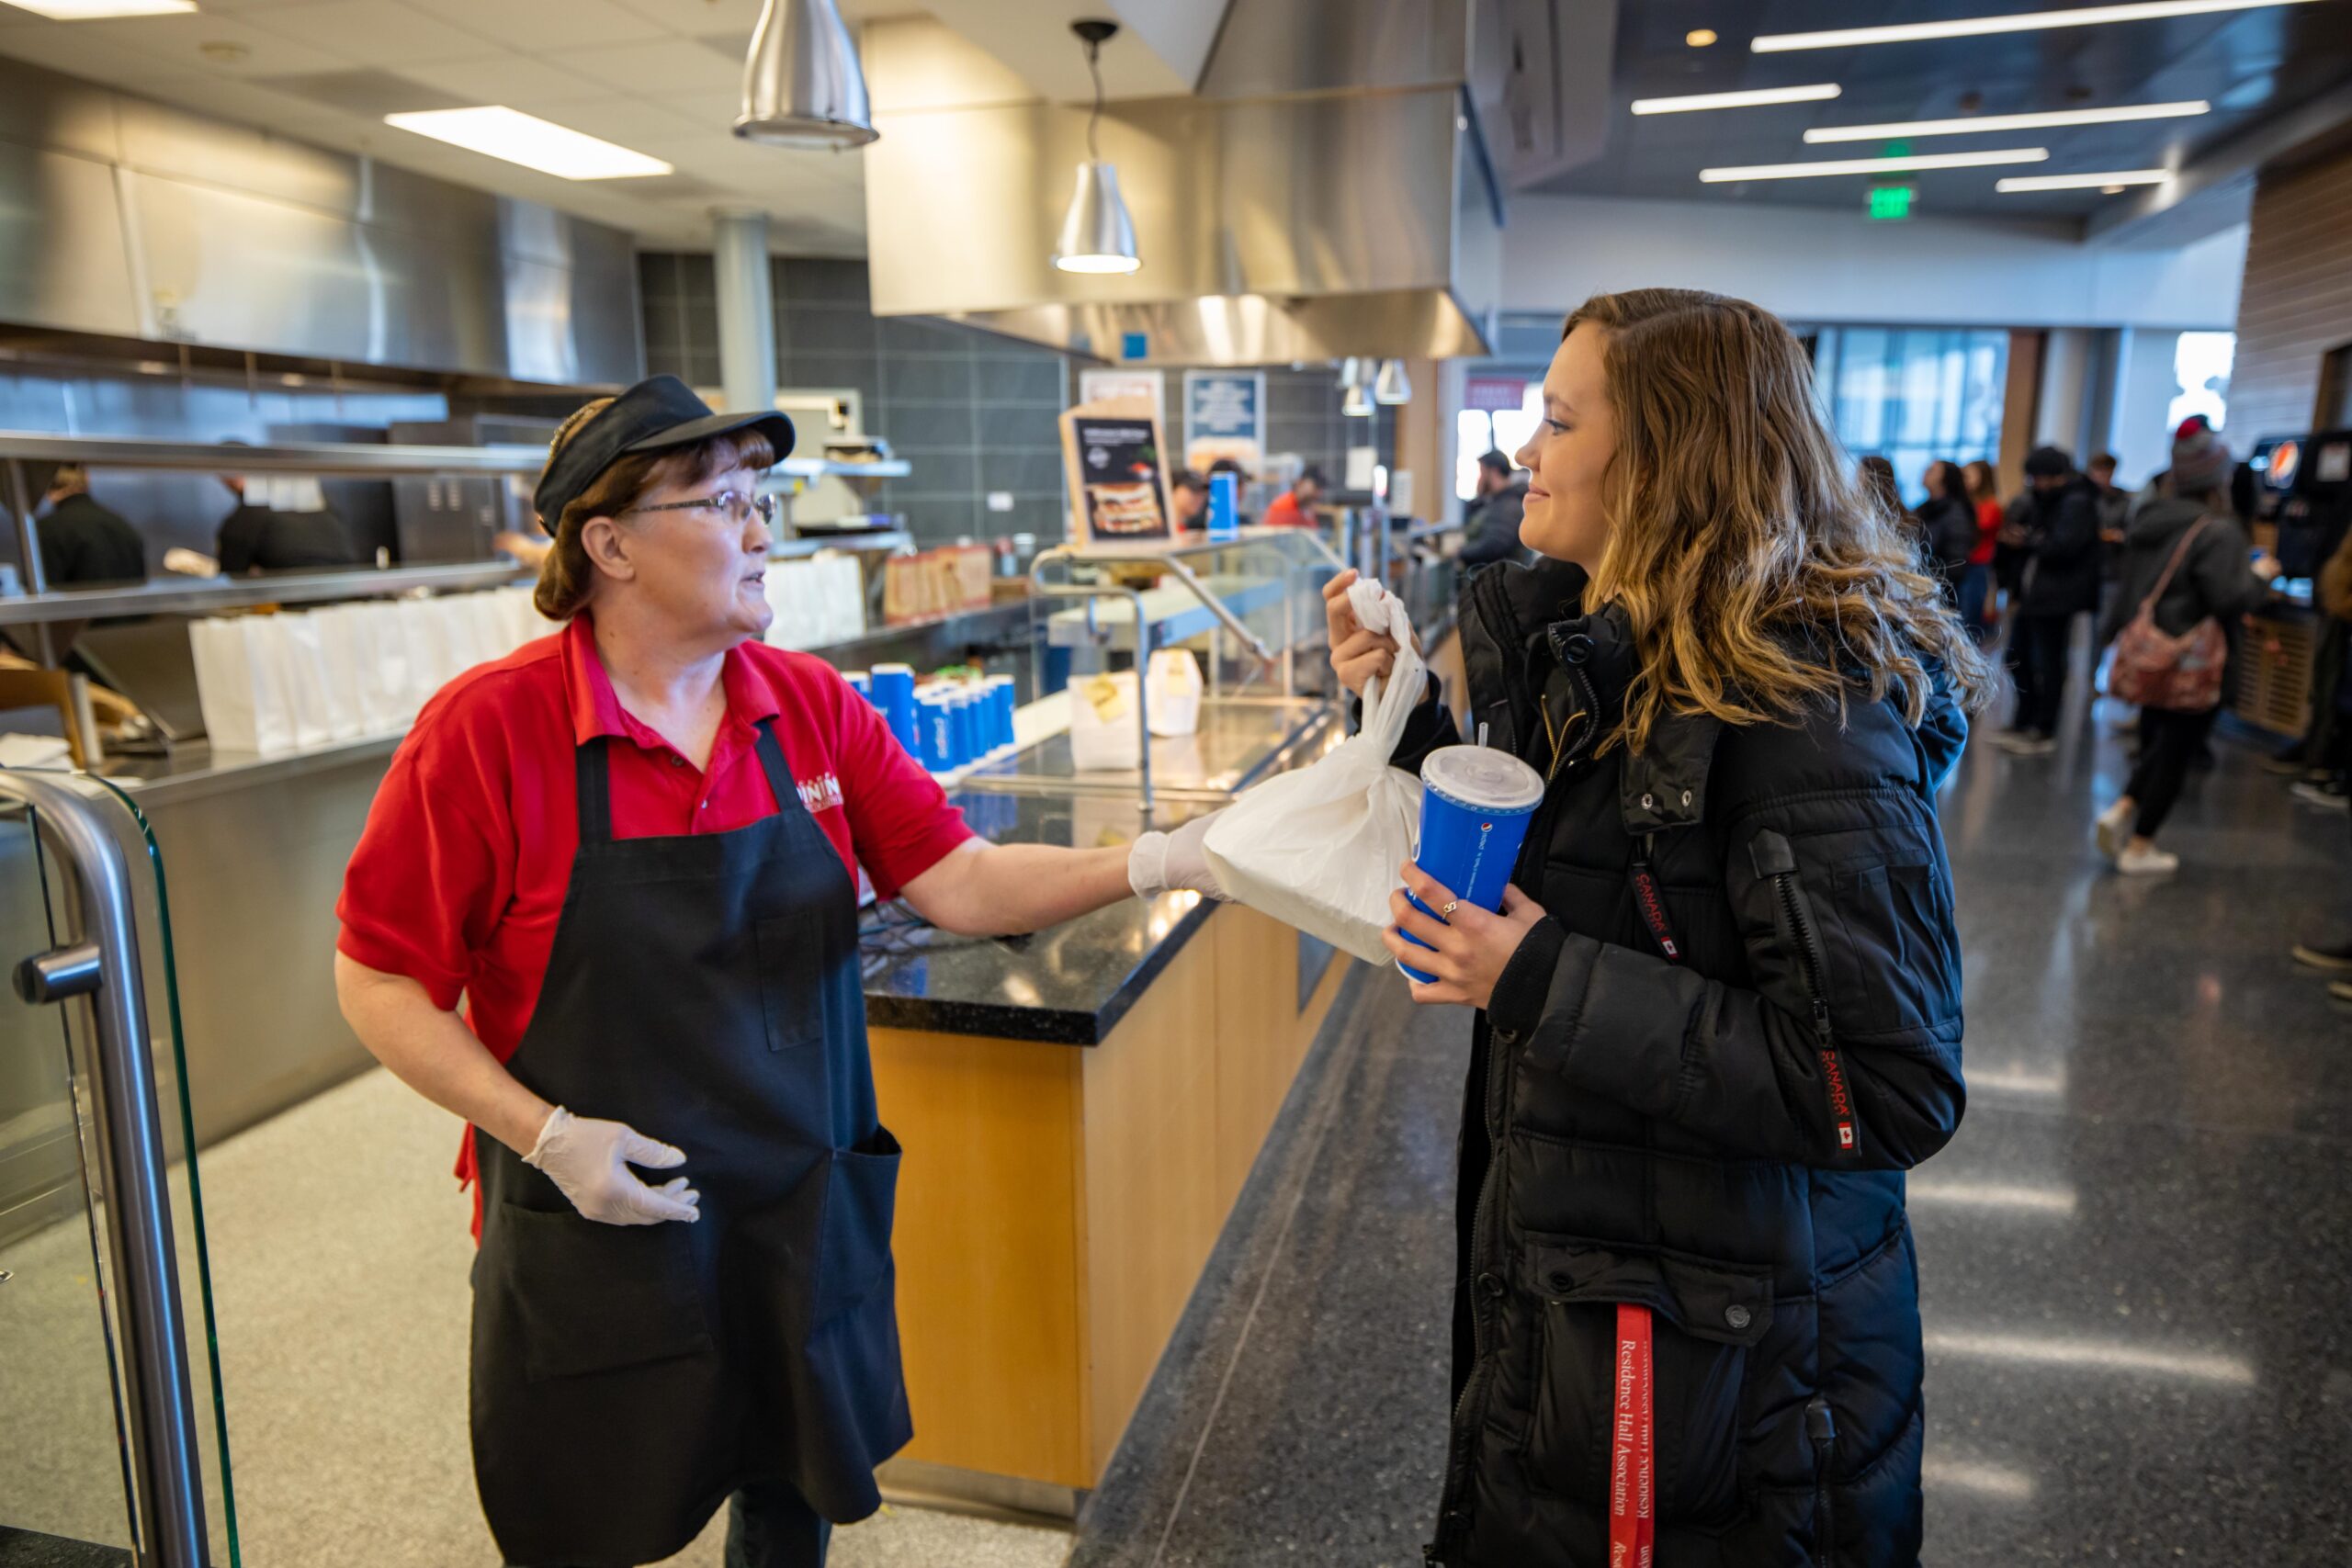 Students, campus dining discuss religious, dietary restrictions